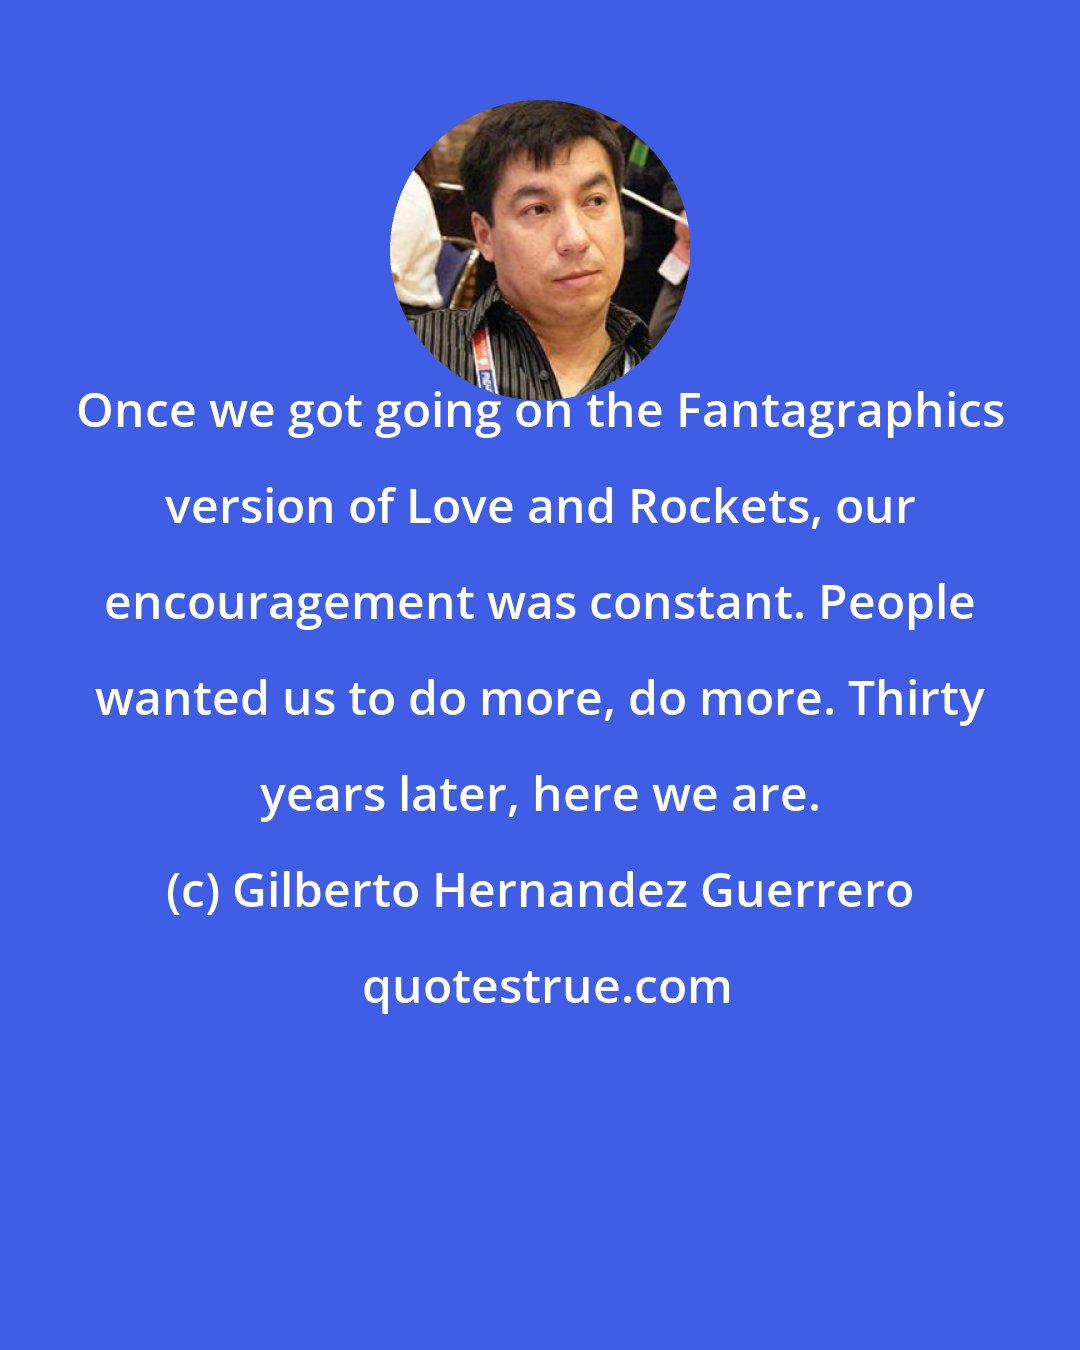 Gilberto Hernandez Guerrero: Once we got going on the Fantagraphics version of Love and Rockets, our encouragement was constant. People wanted us to do more, do more. Thirty years later, here we are.